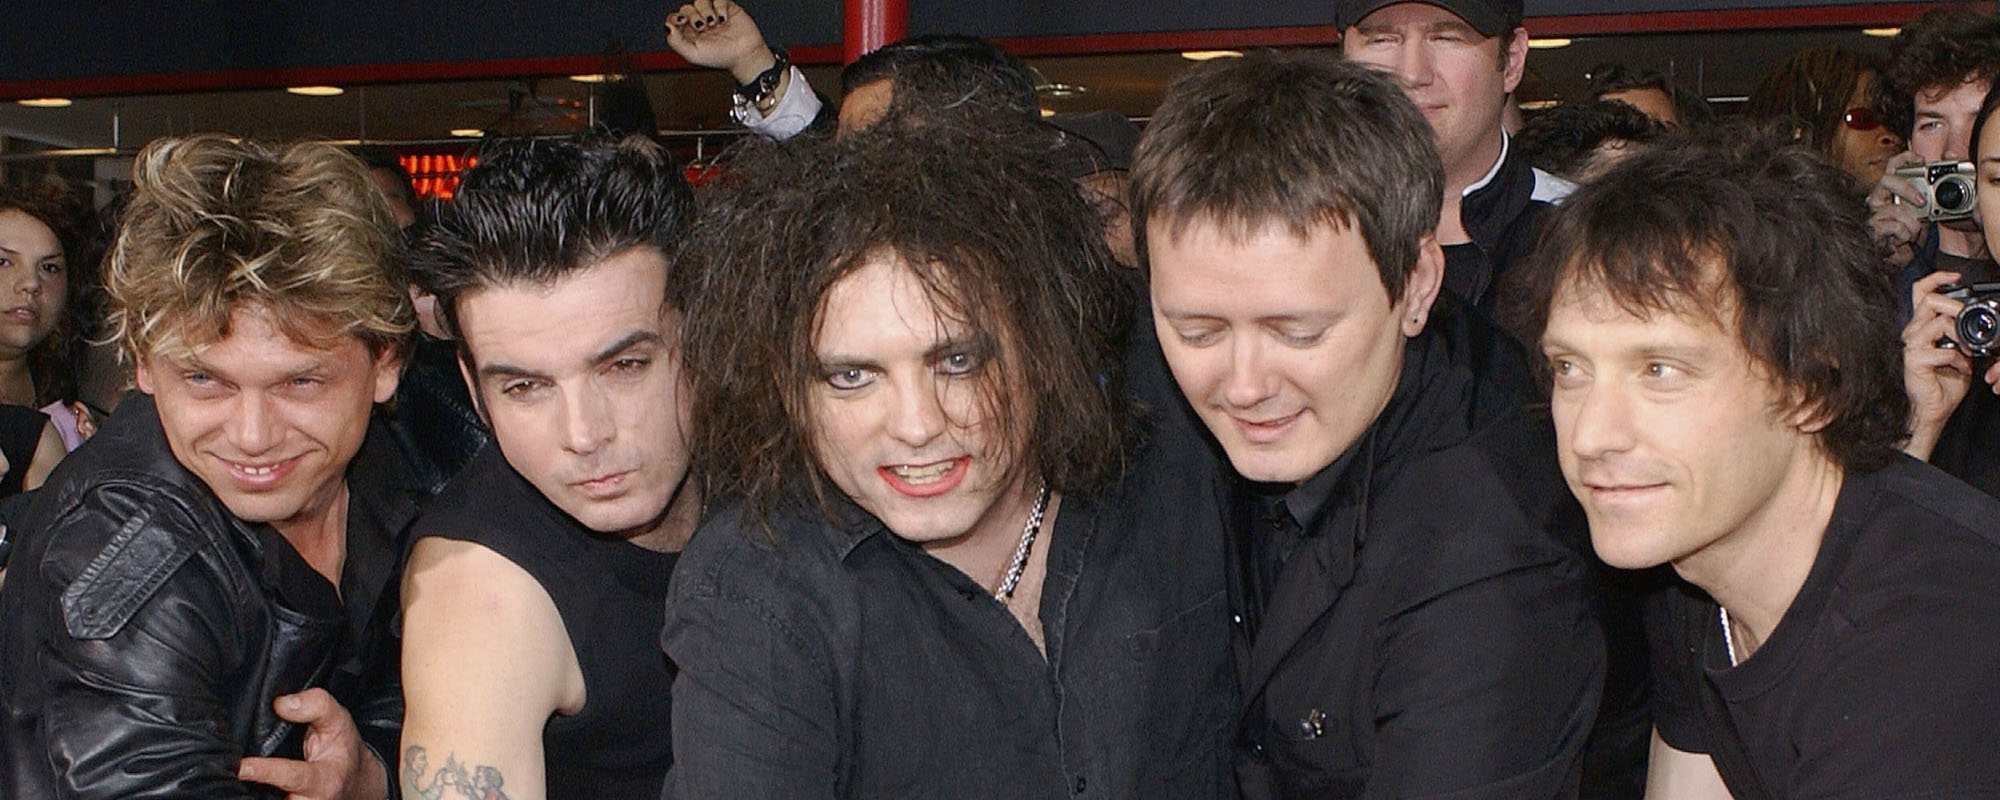 Behind the Band Name: The Cure